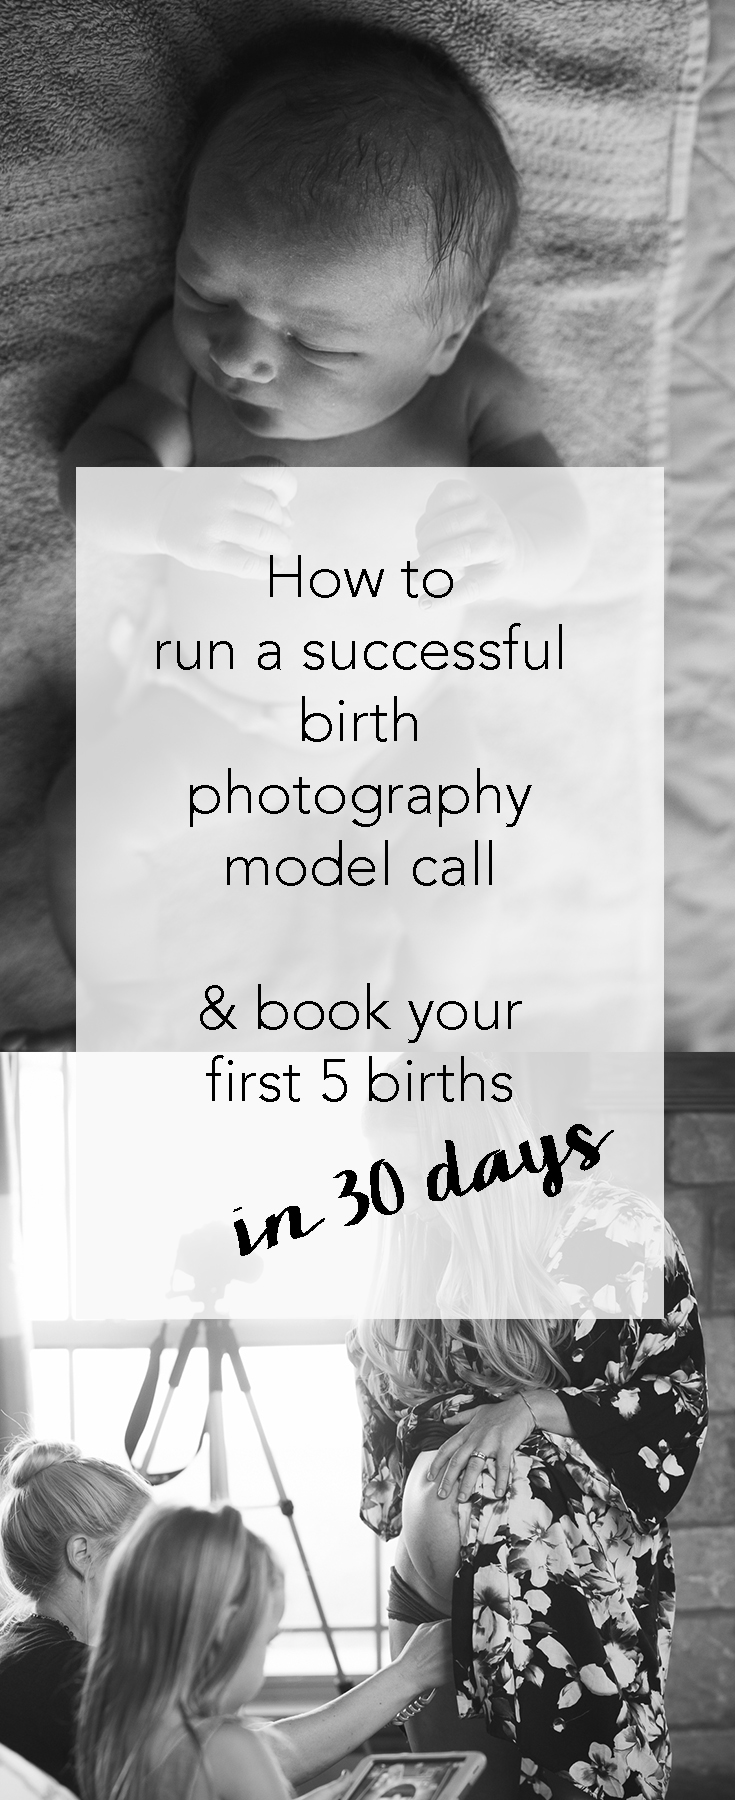 How to run a successful model call and book your first 5 birth photography clients in 30 days